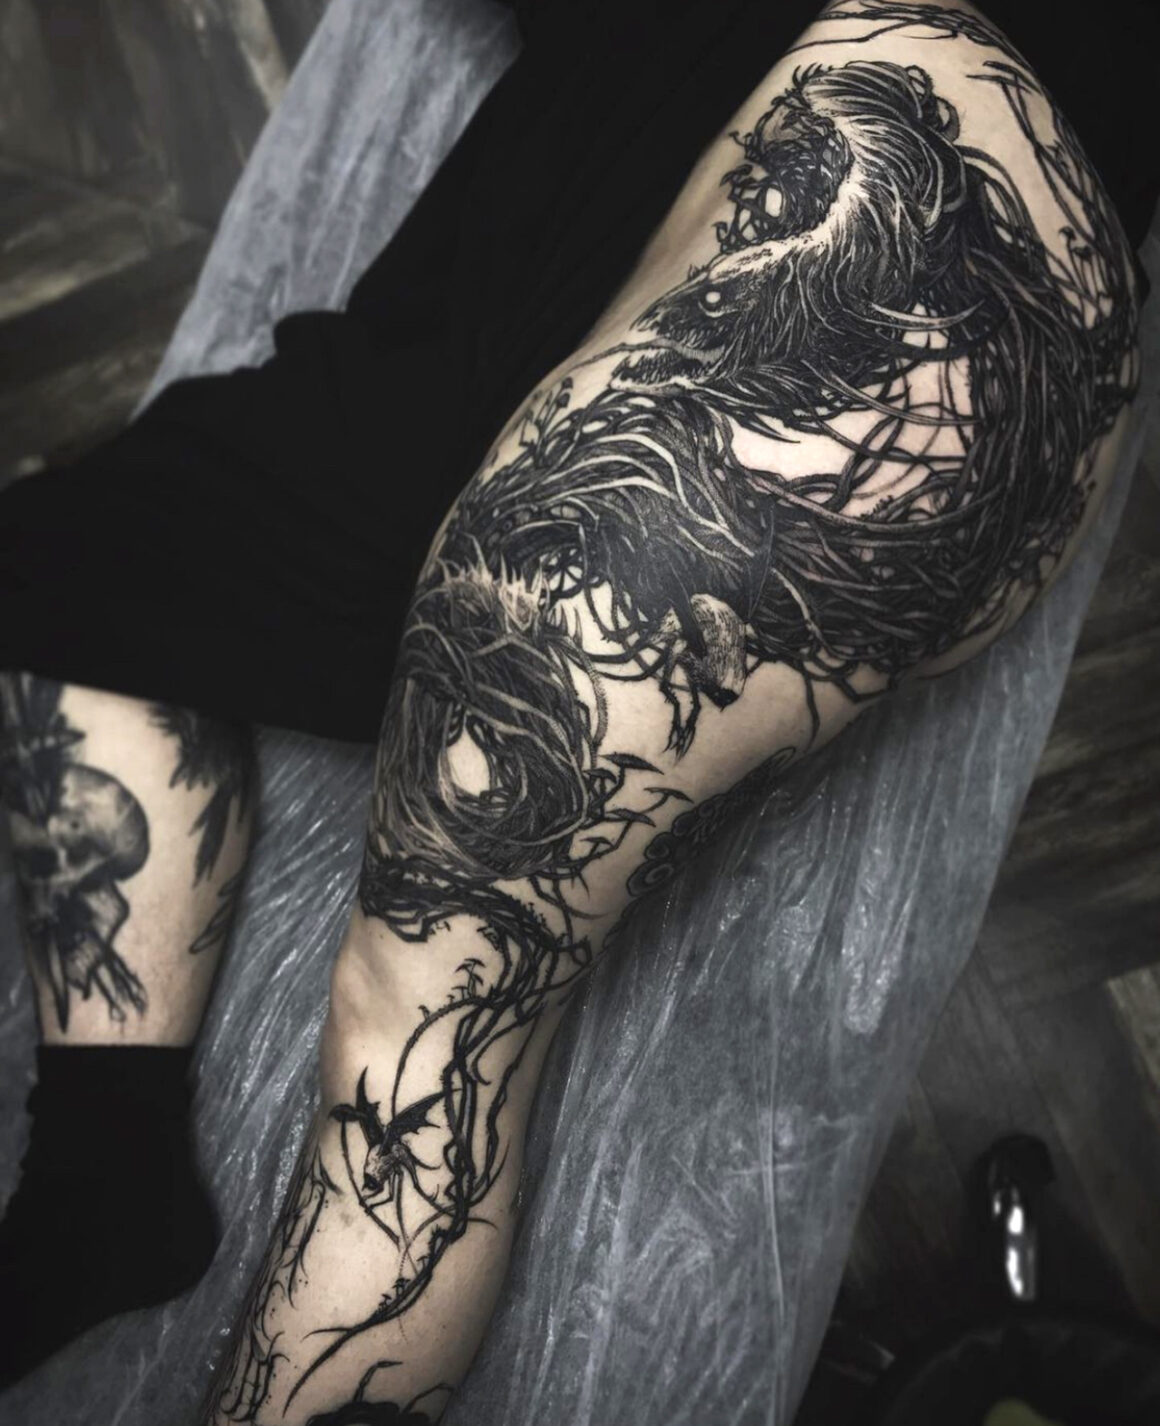 A selection of the best of international tattooing - Tattoo Life